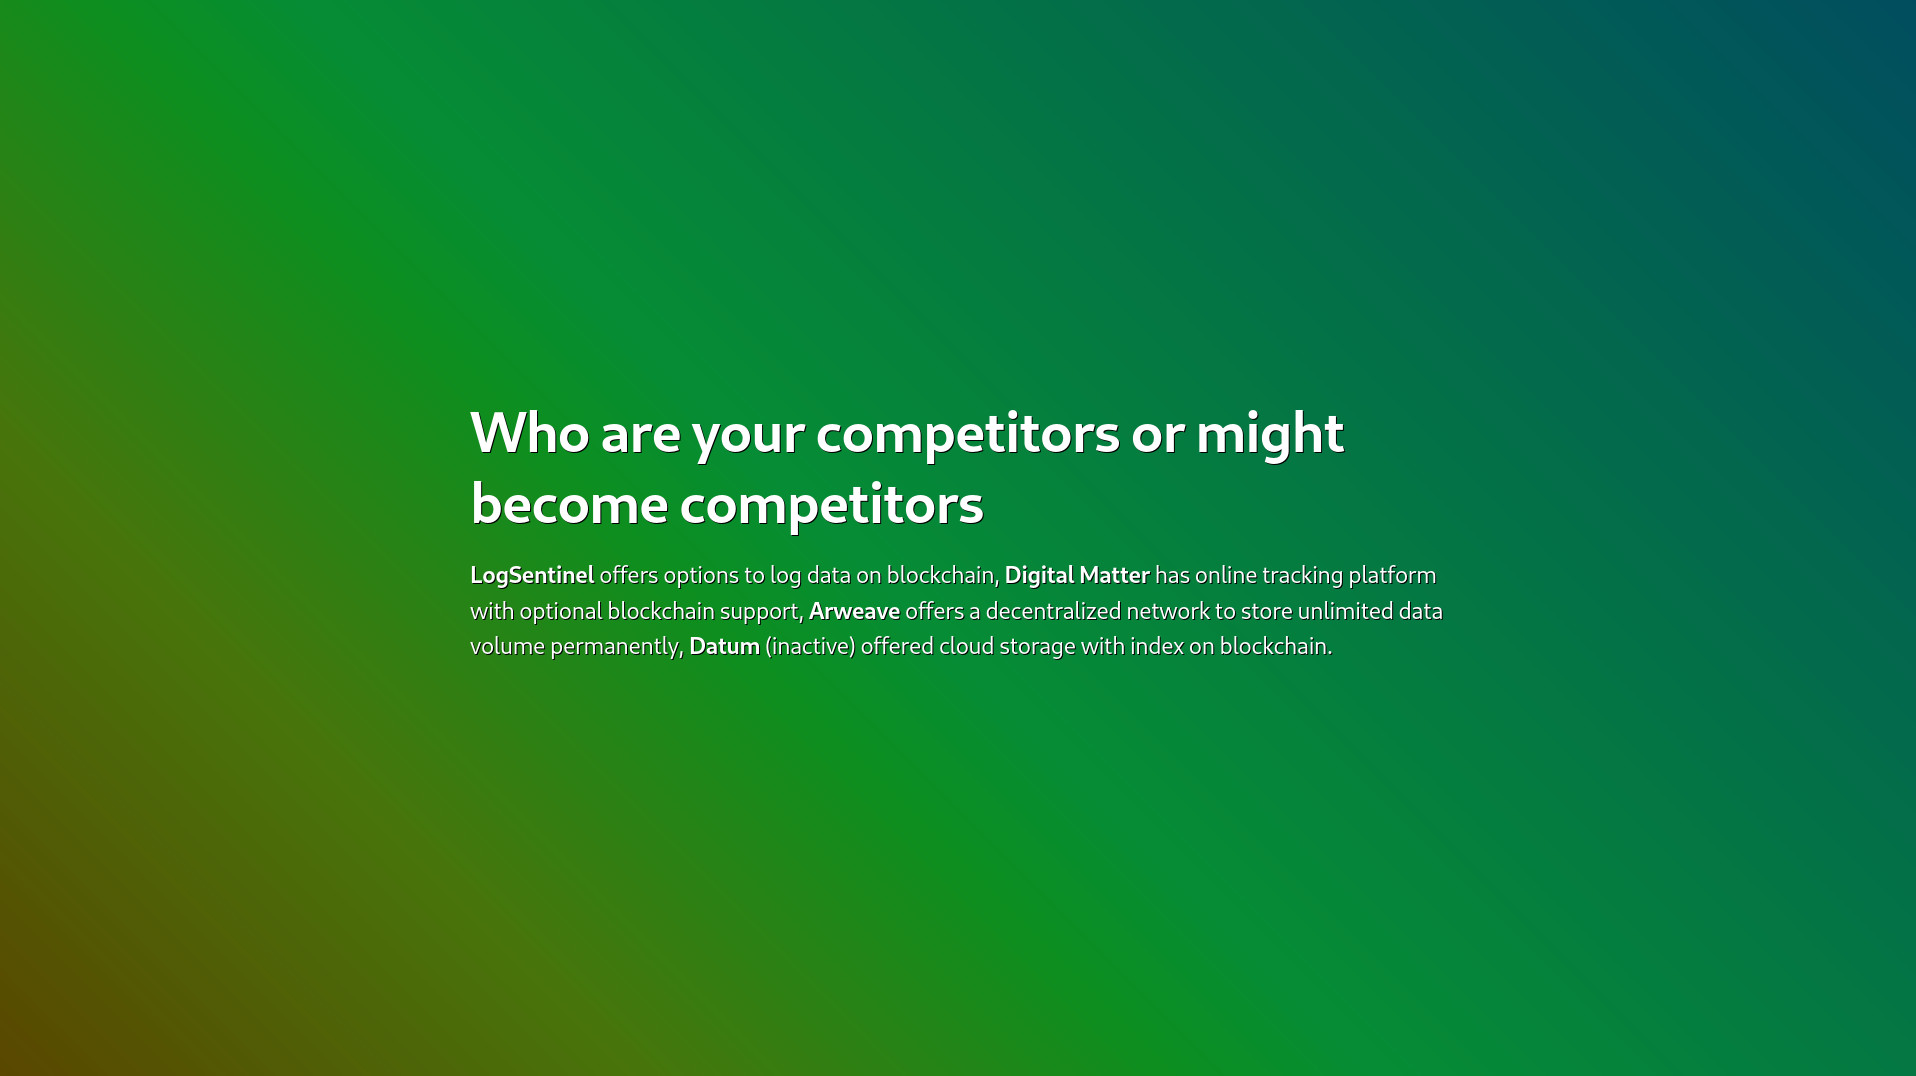 Who are your competitors or might become competitors